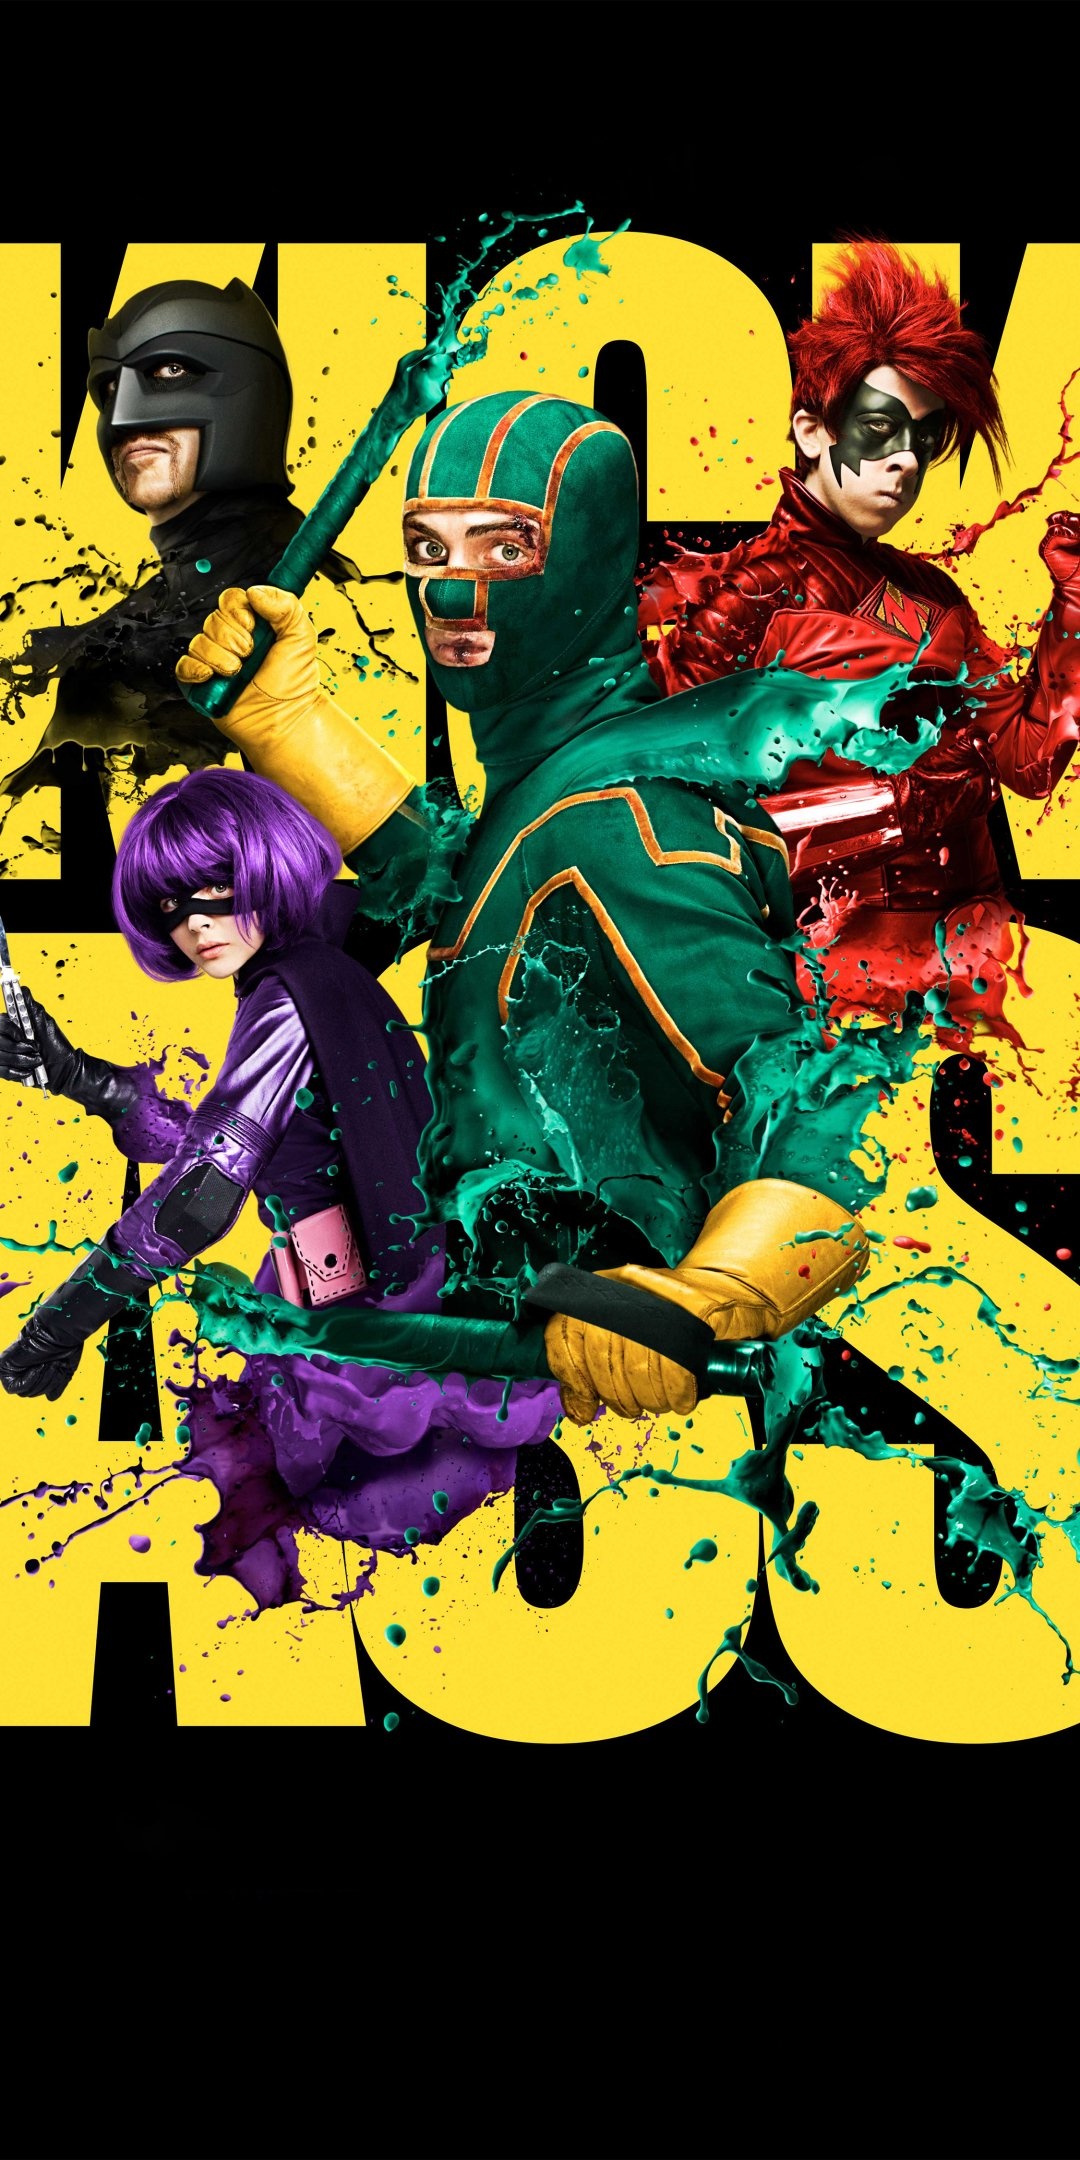 Kick-Ass: The 2011 Empire Award for Best British Film, Black comedy. 1080x2160 HD Background.